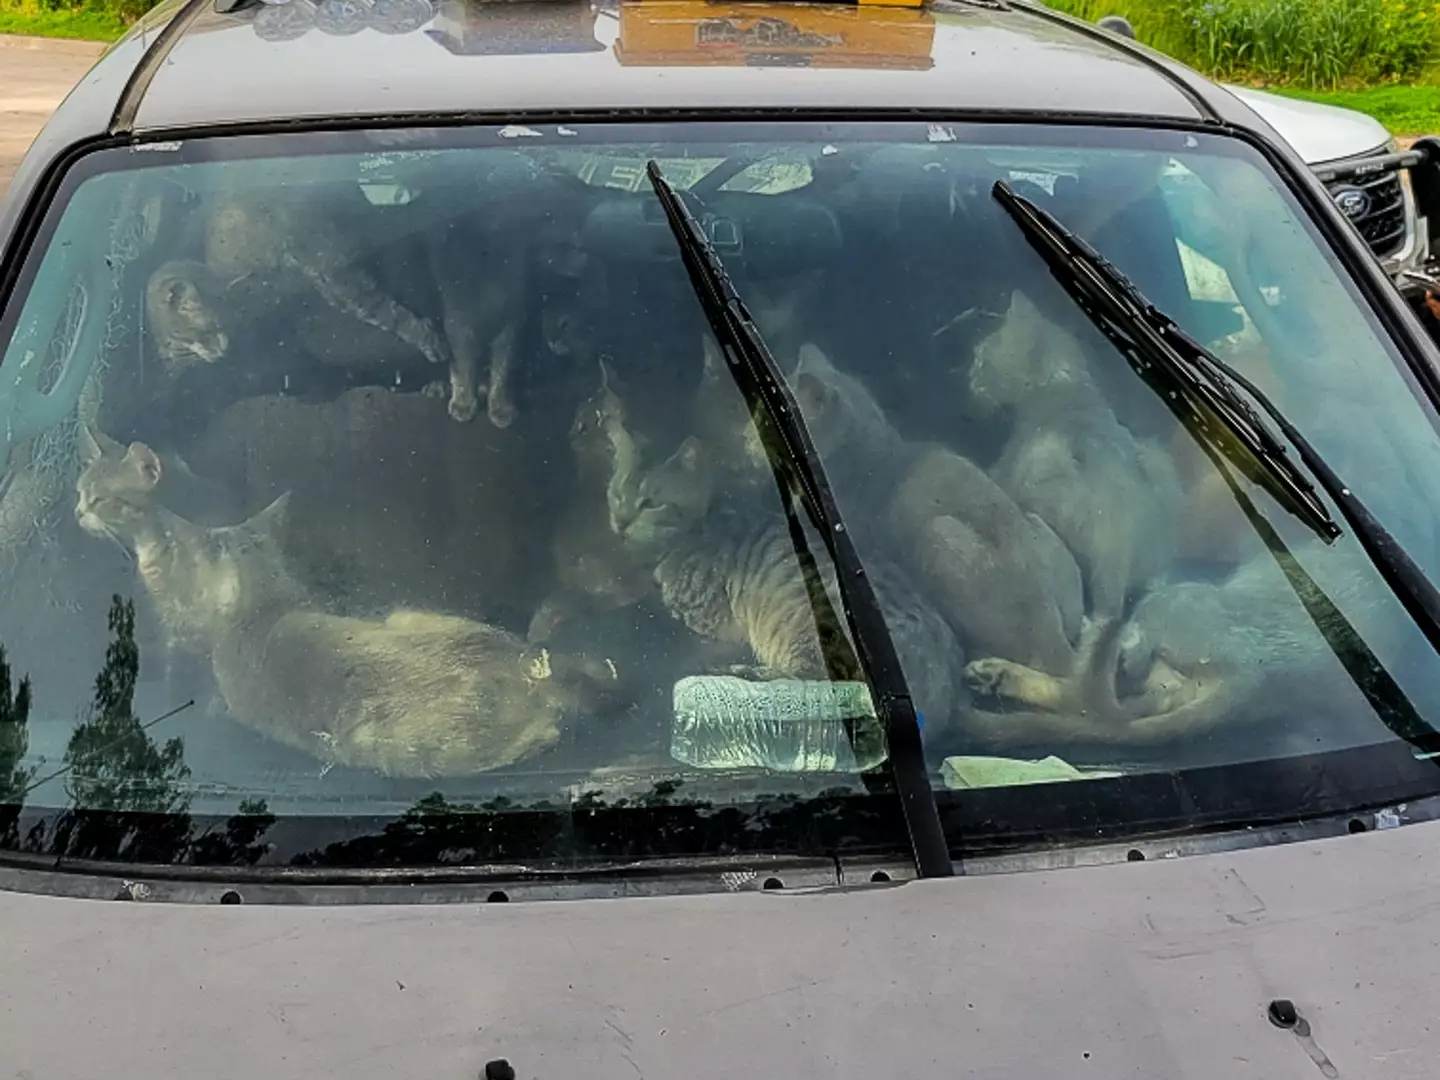 A man was found living in his car with 47 cats.